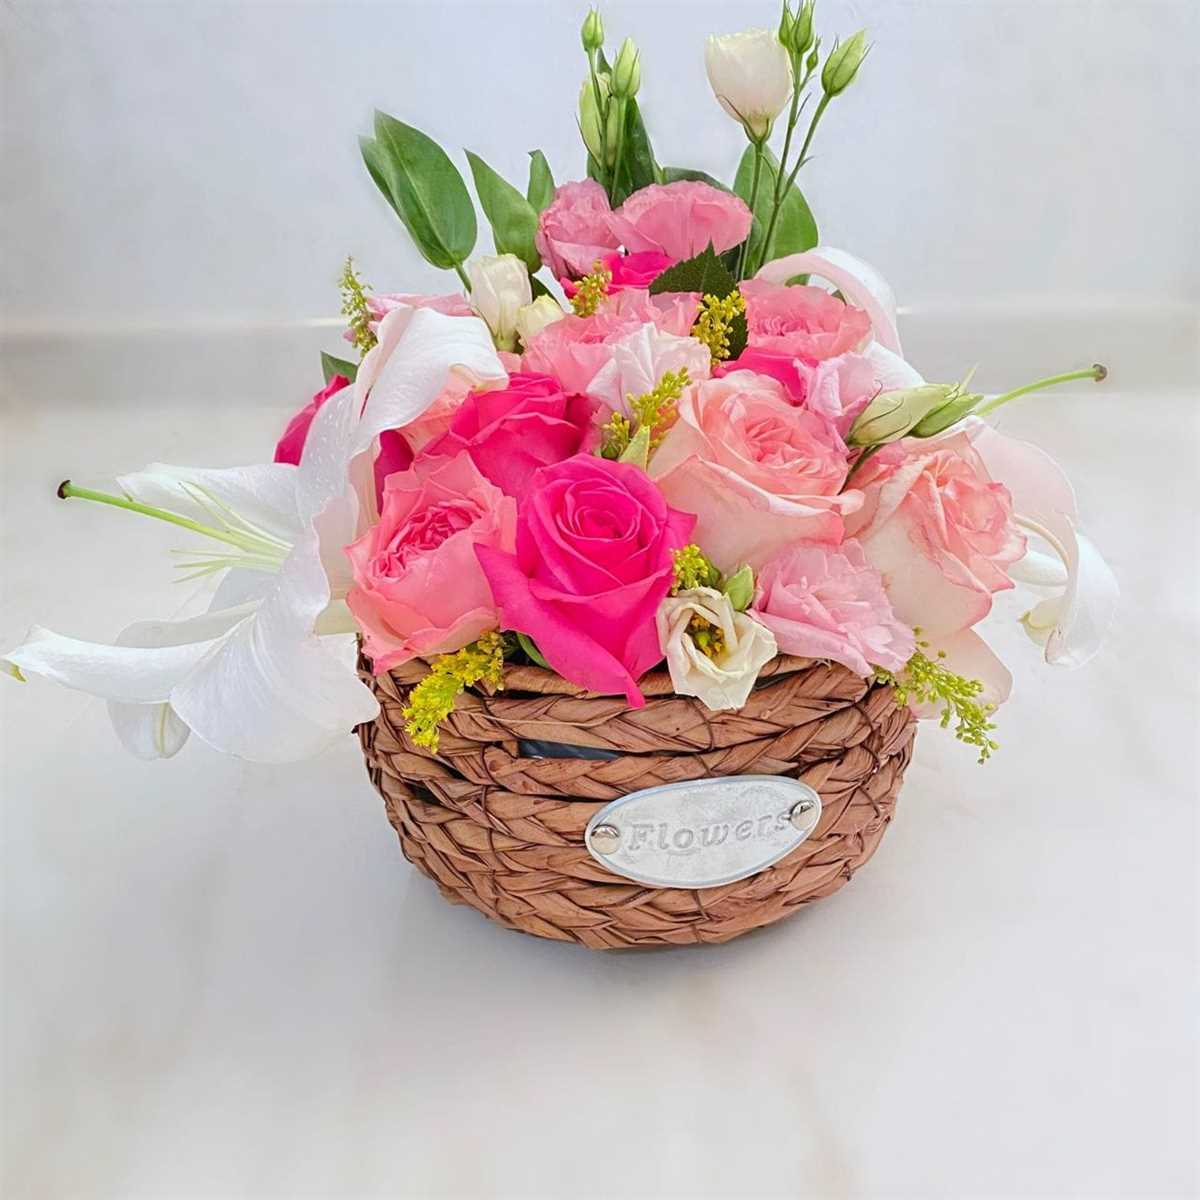 Flower arrangement and gift wrapping course